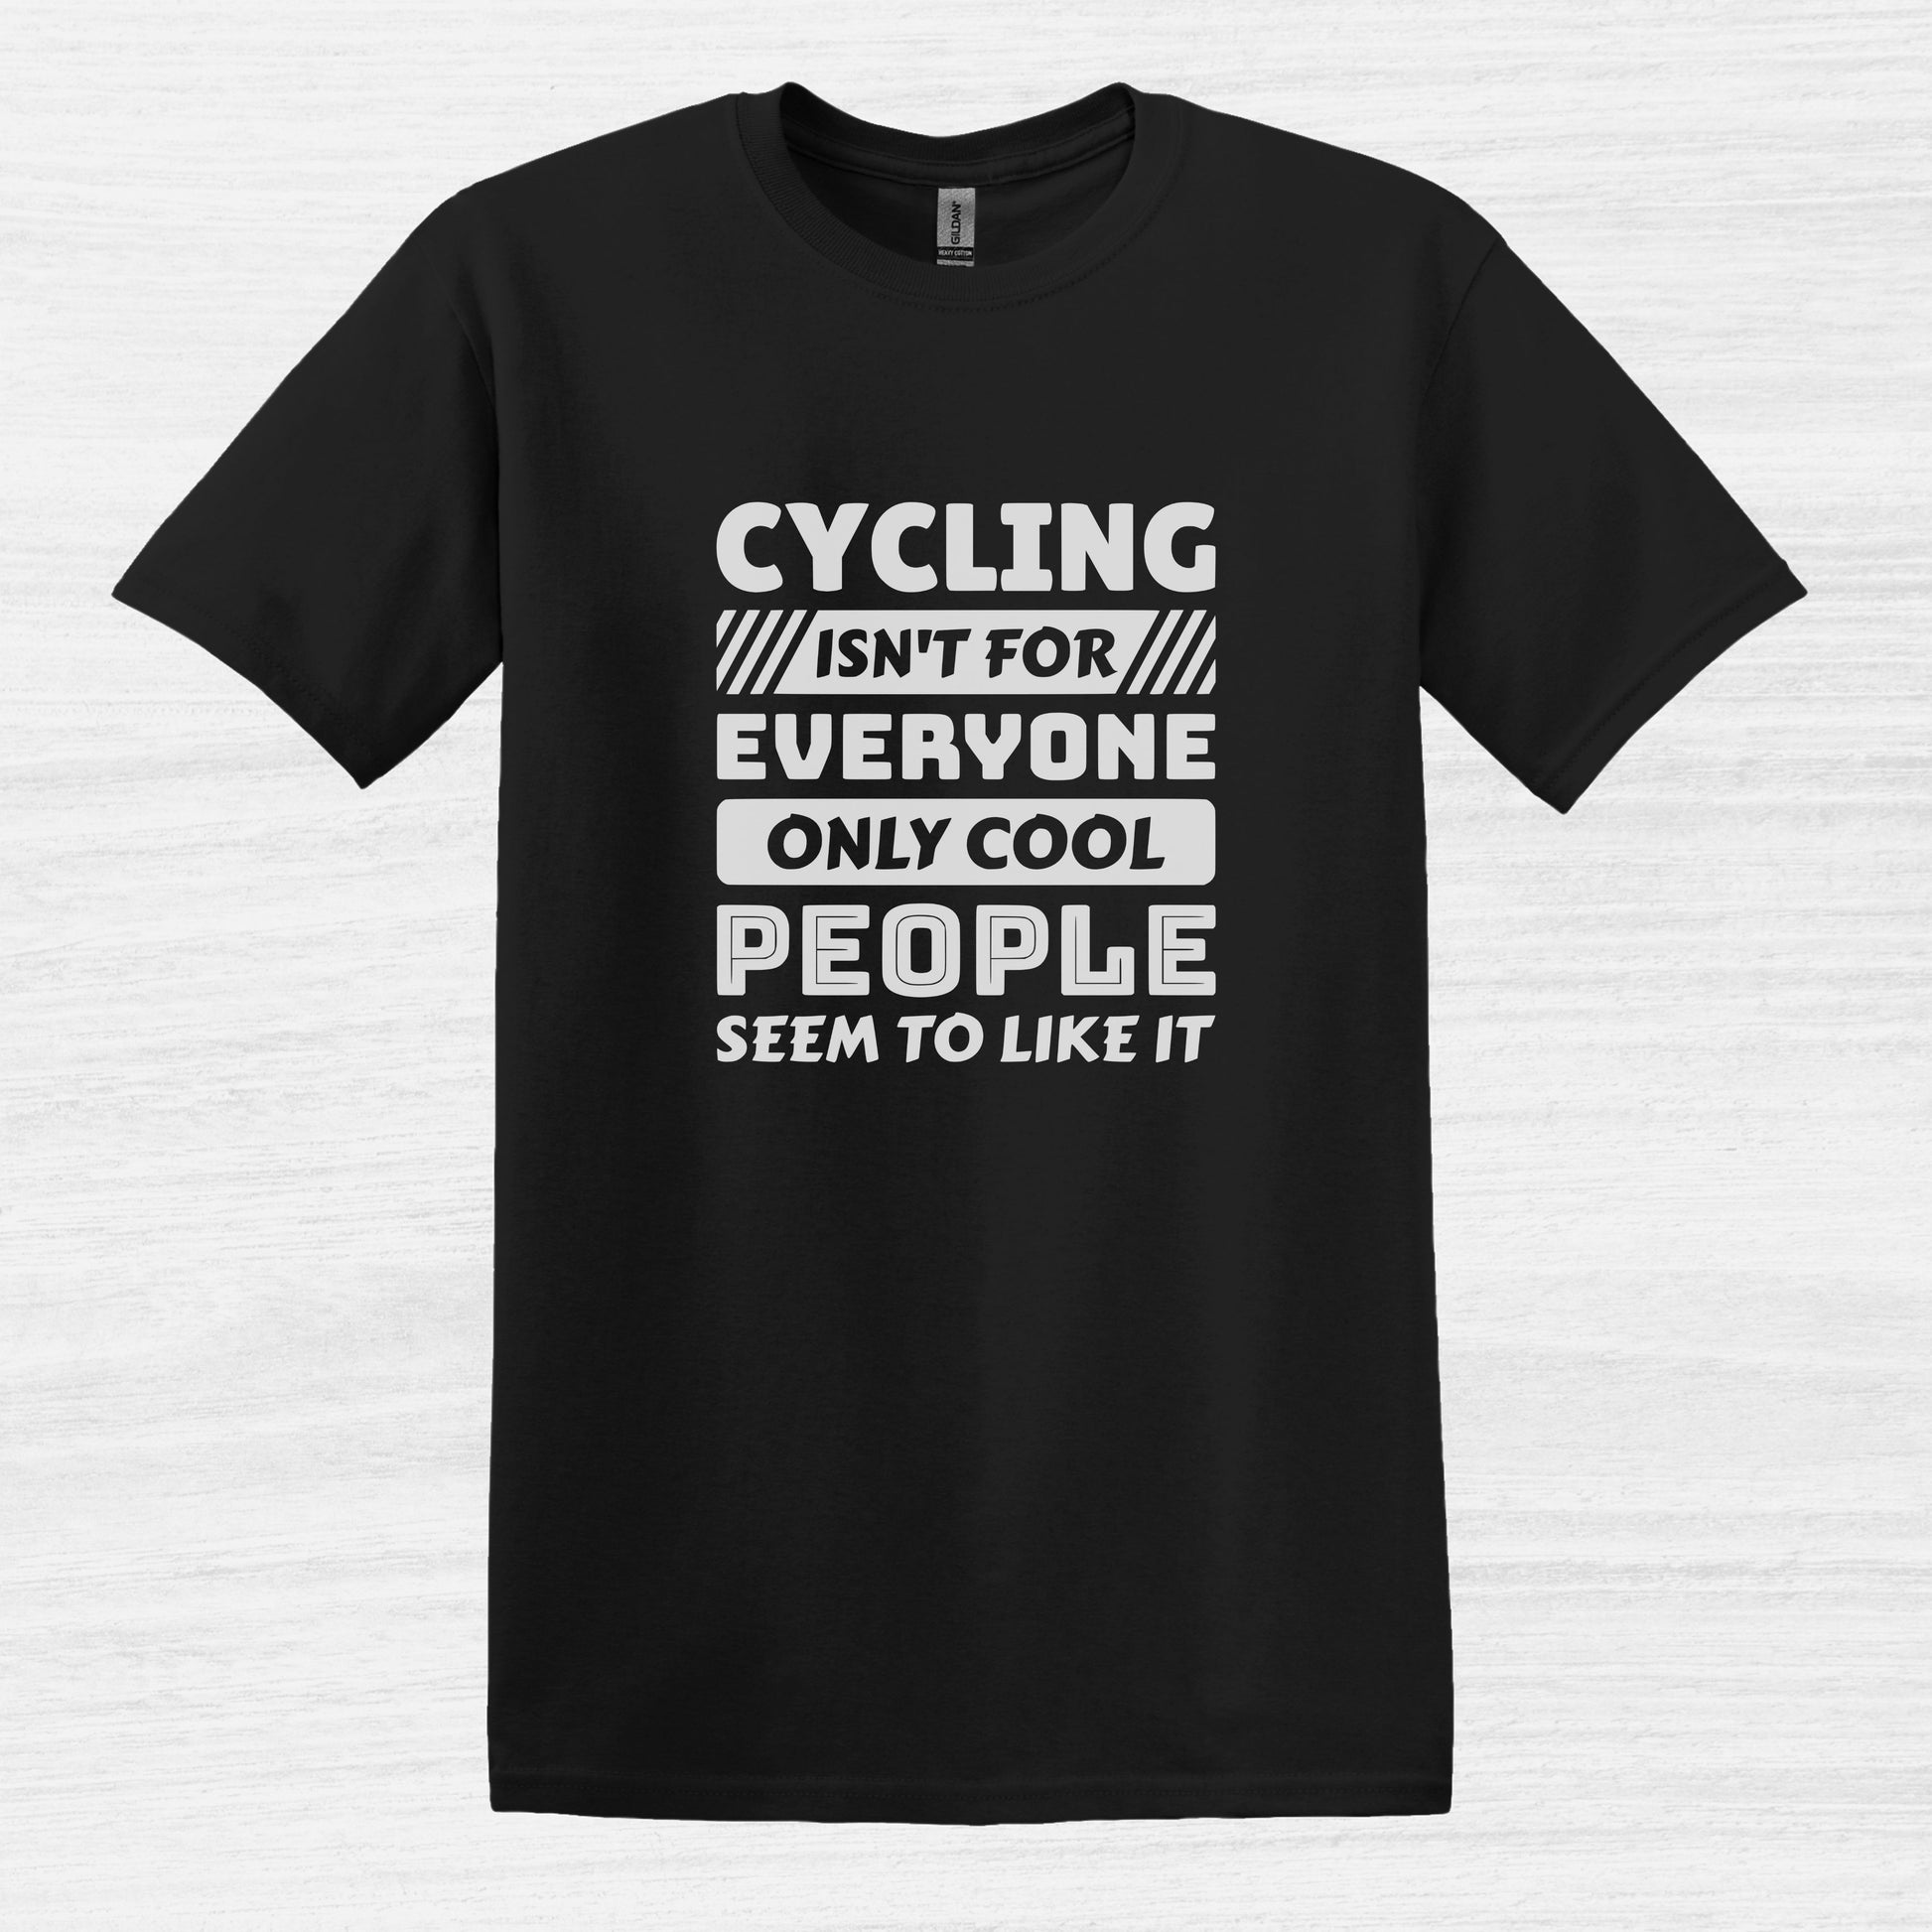 Bike Bliss Cycling isn't for everyone only Cool People seem to like it T-Shirt for Men Black 2